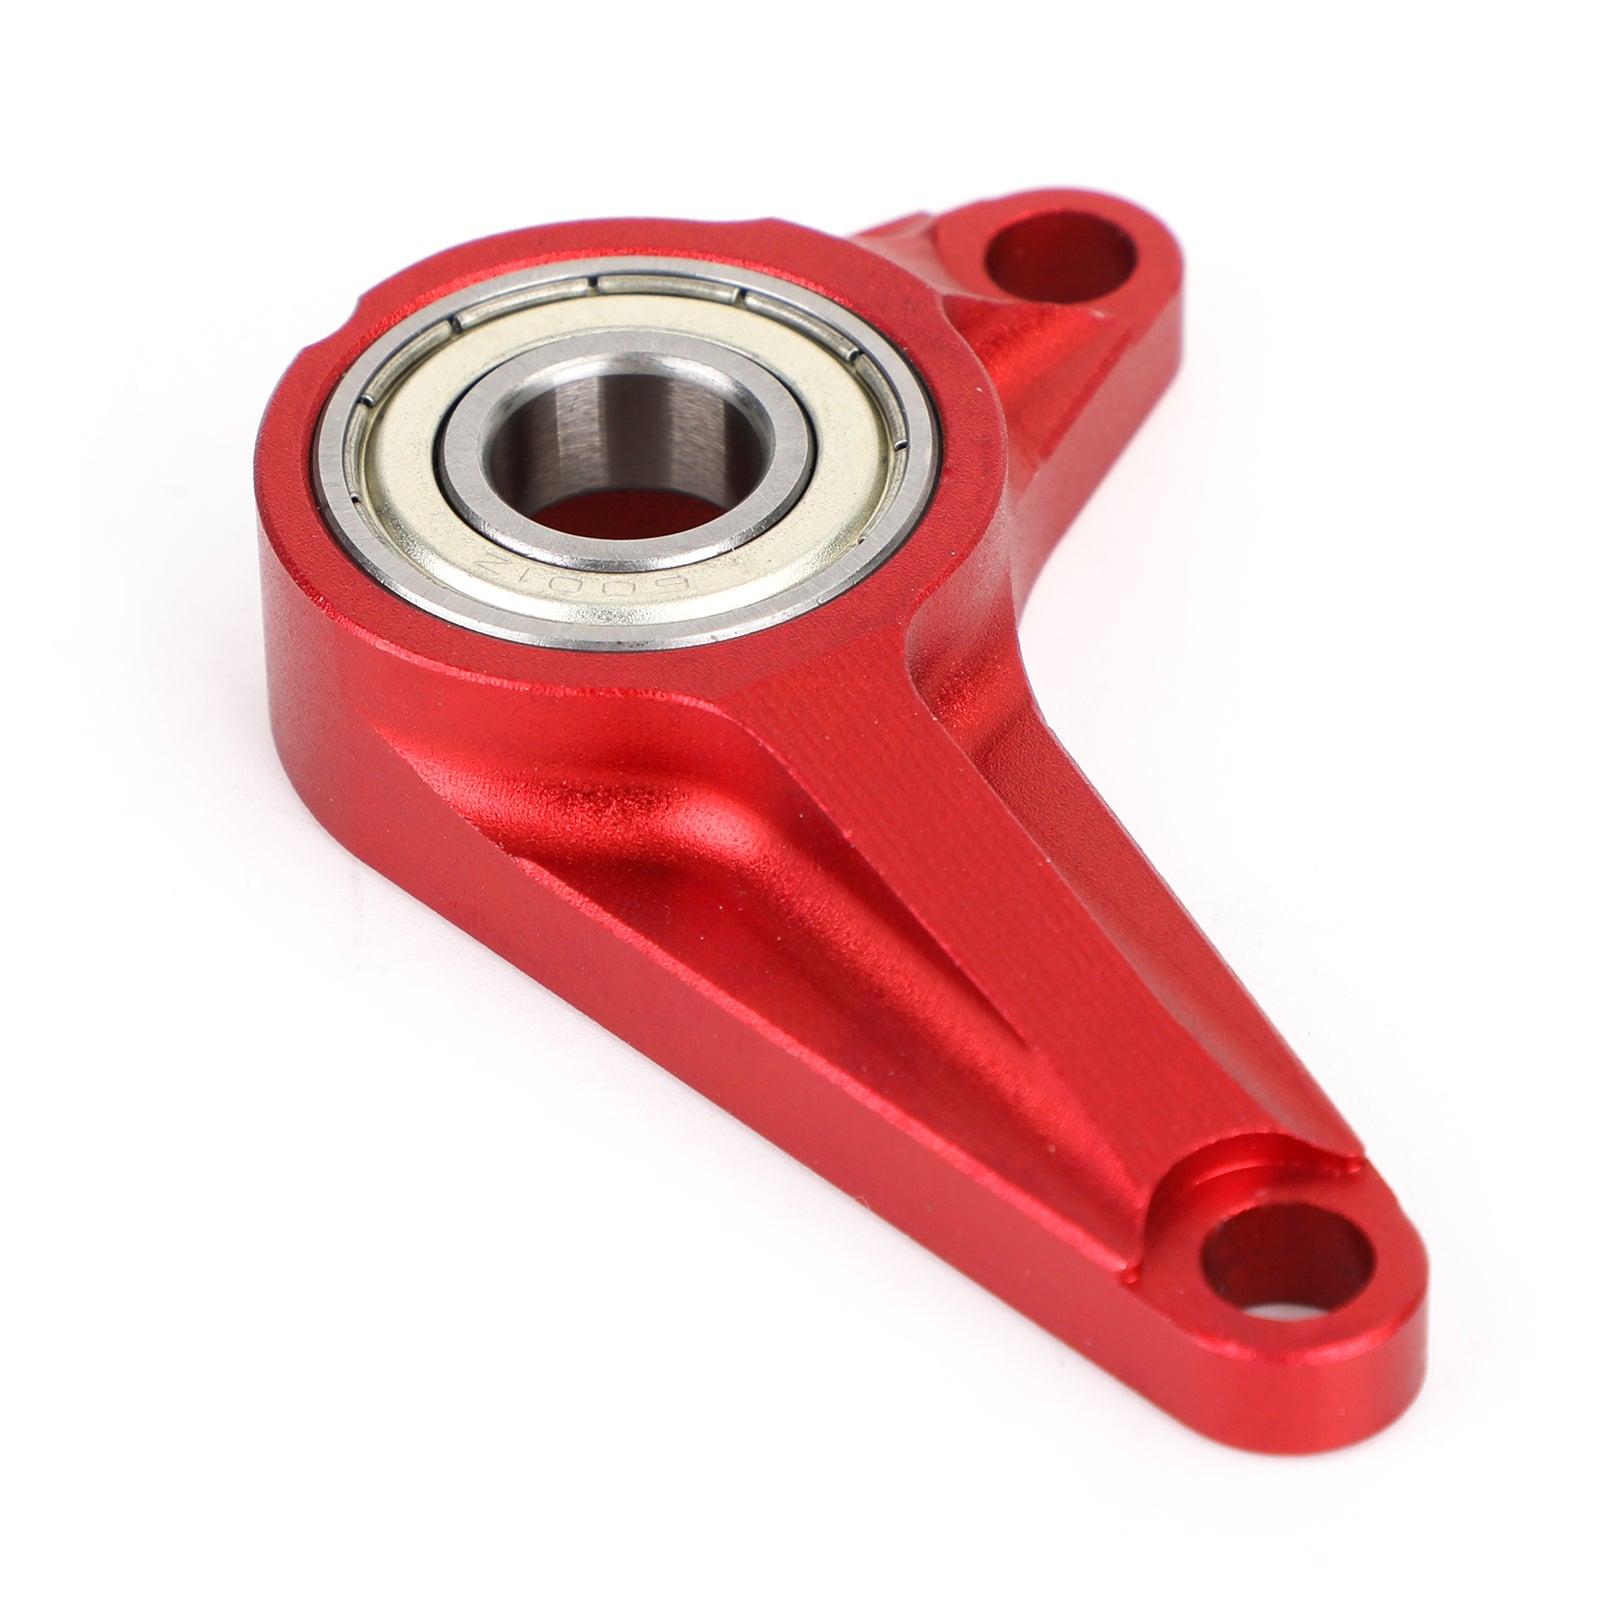 Honda MSX125 Grom 125 13-15 MSX125SF Grom 125 16-19 Shifting Gear Stabilizer w/ Mounting Bolts Red